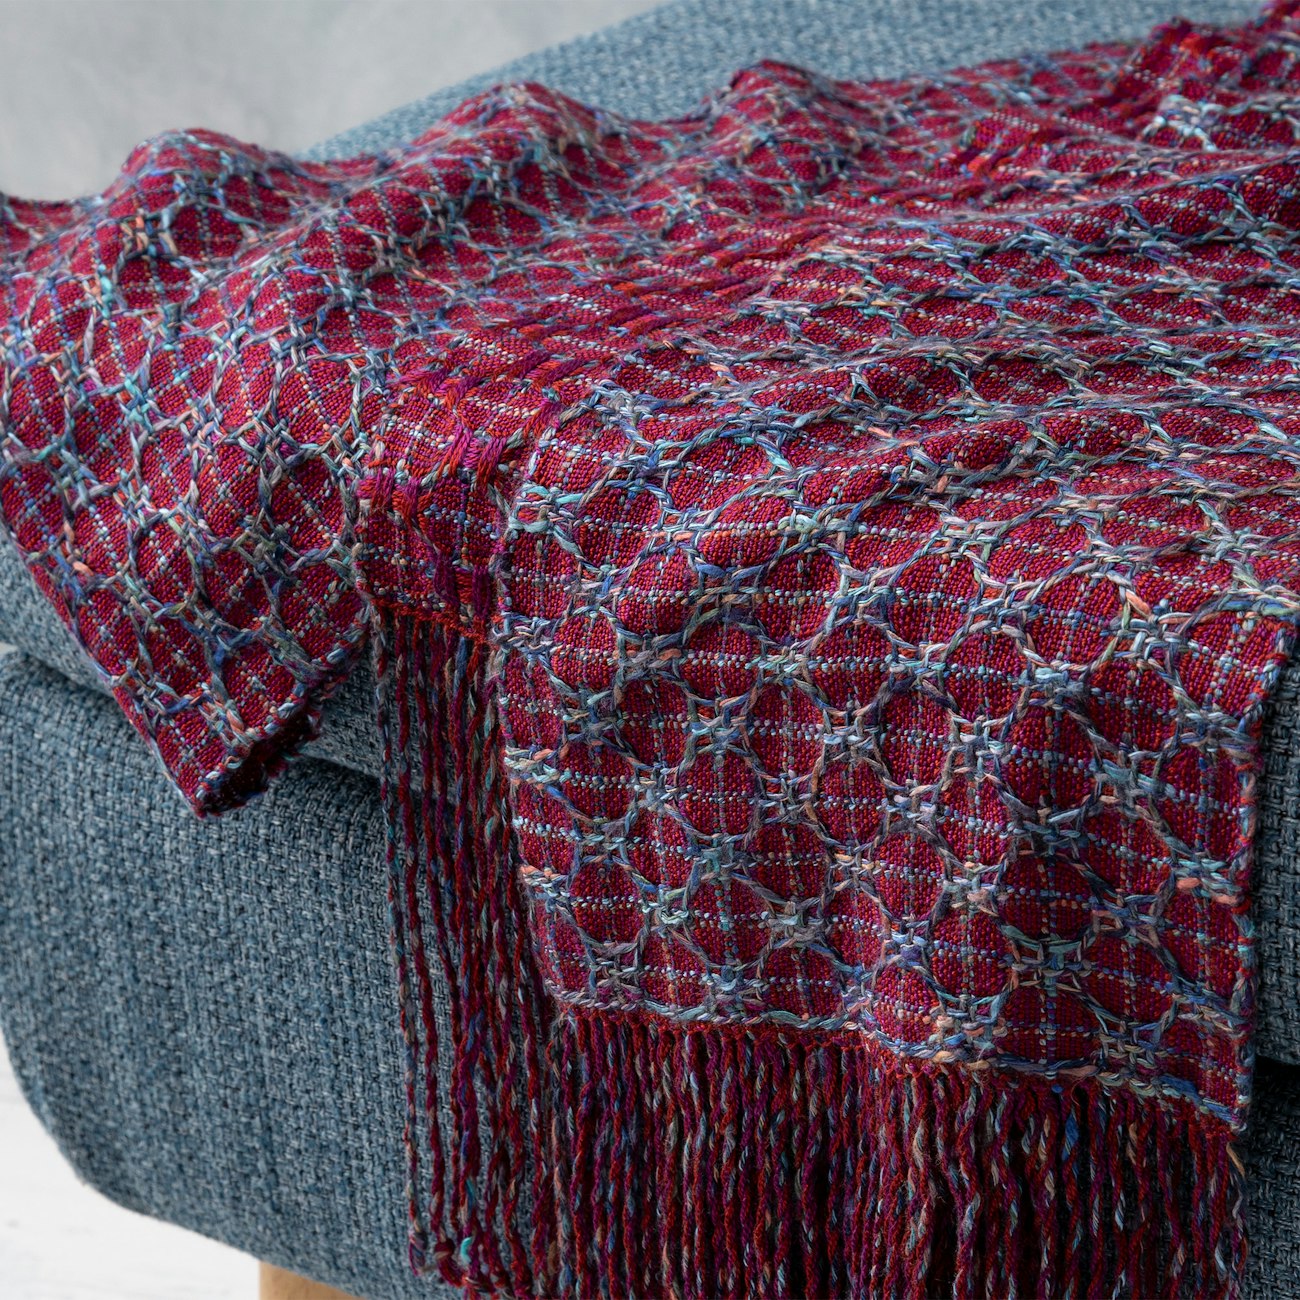 Choosing the right yarn made this honeycomb scarf possible, and we love how the colors are so complementary. Blue Circling Embers by Annette Swan Schipf from Handwoven Nov/Dec 2021. Photo by Matt Graves